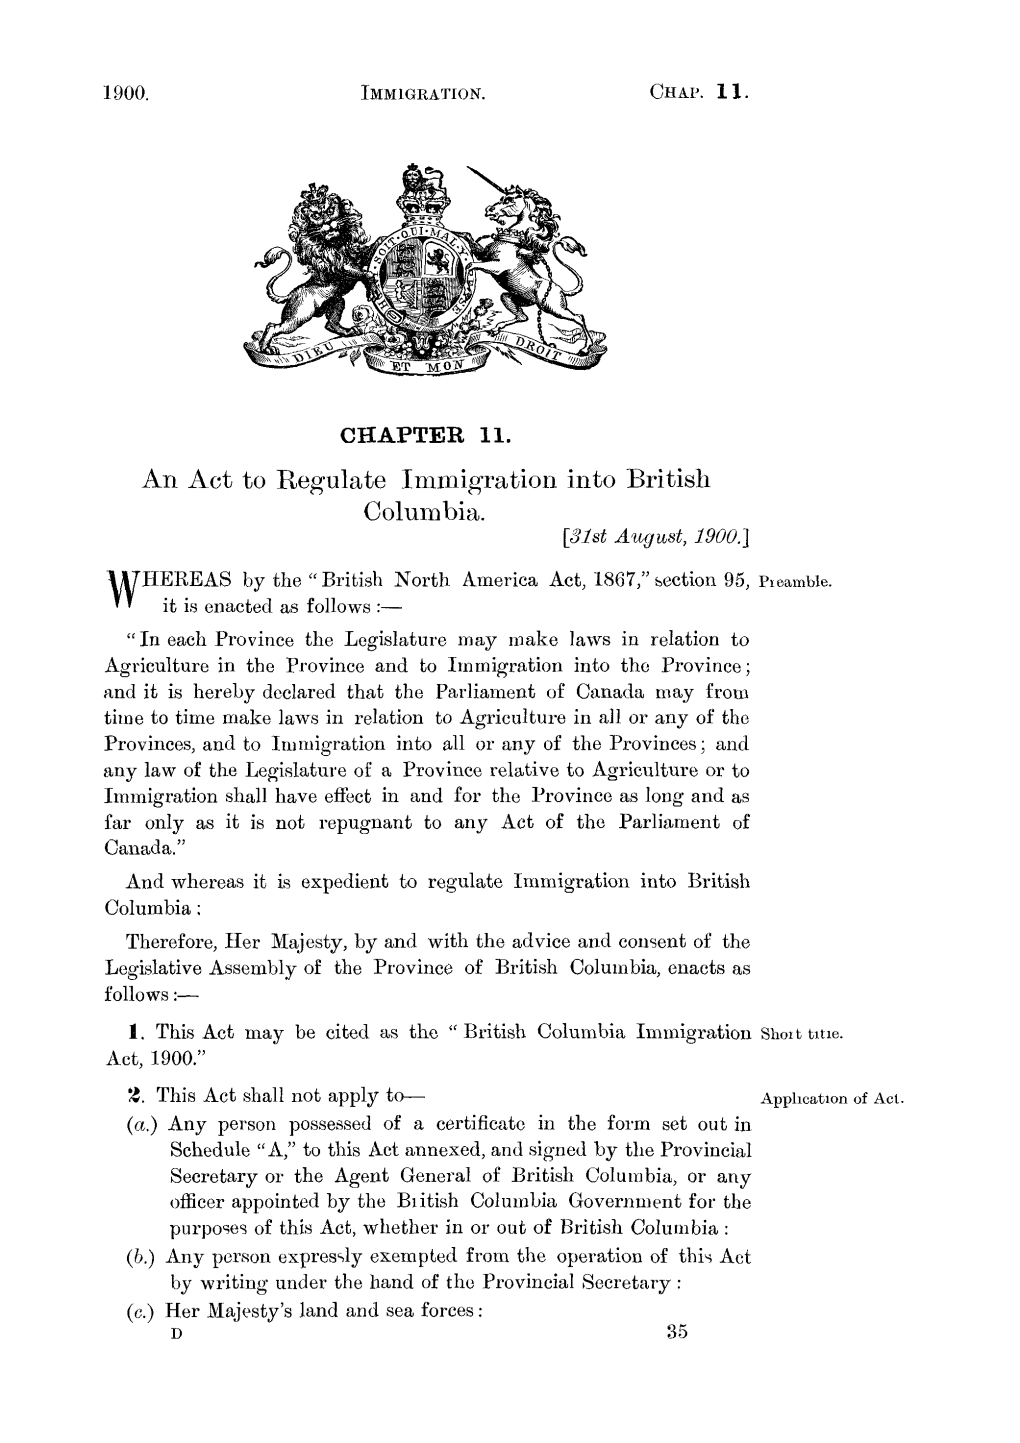 An Act to Regulate Immigration Into British Columbia. [31St August, 1900.]